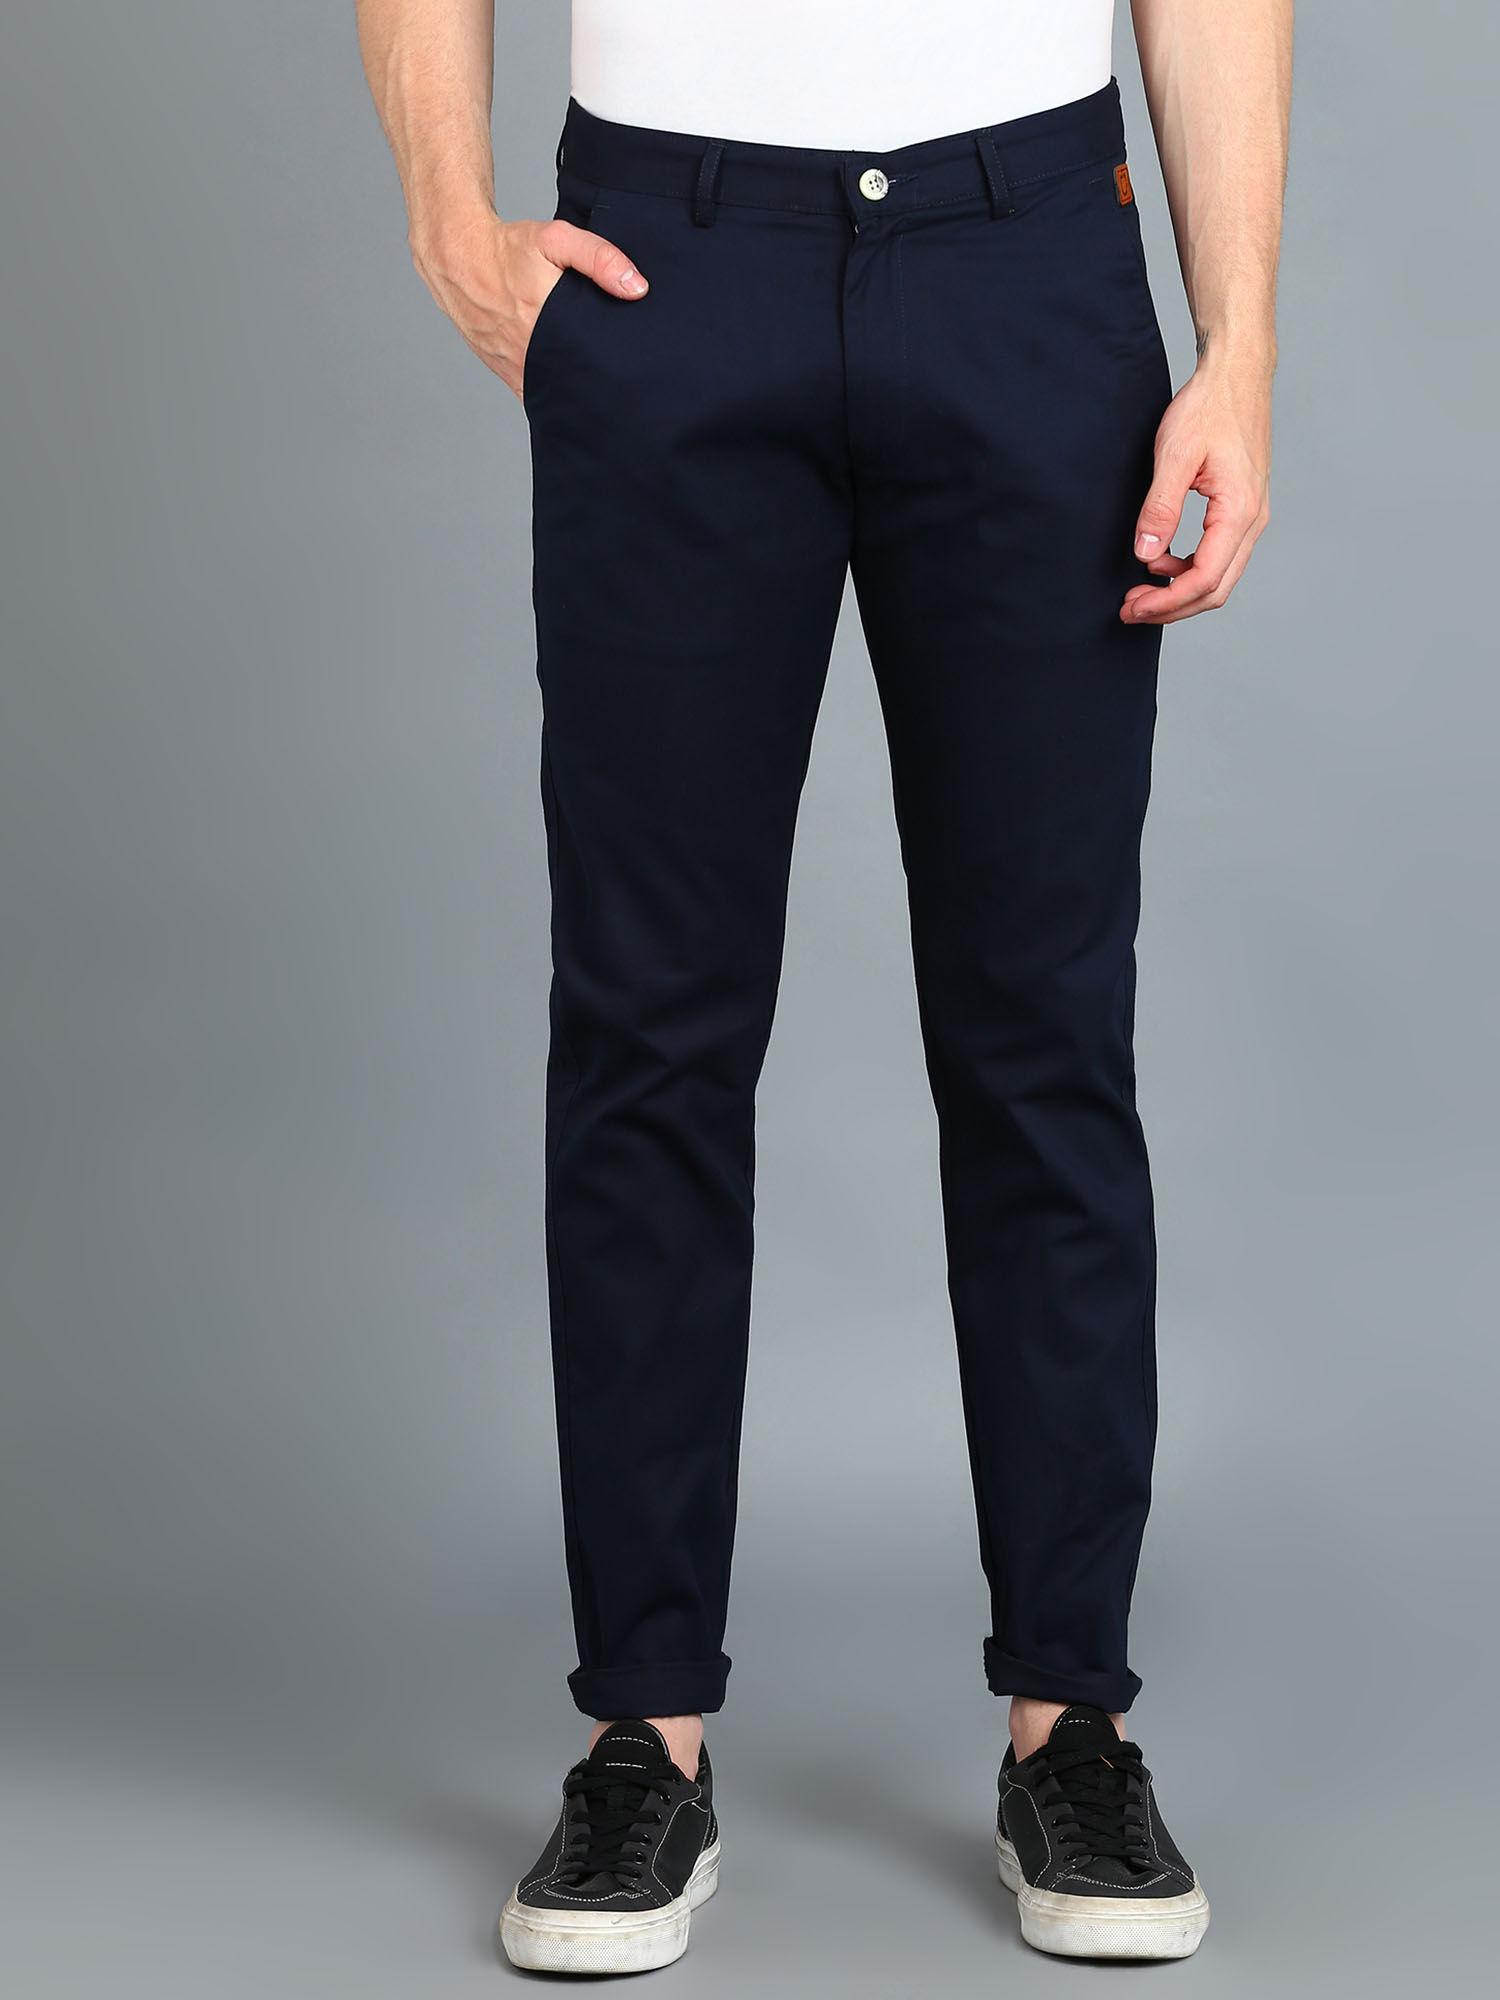 men-navy-blue-cotton-slim-fit-casual-chinos-trousers